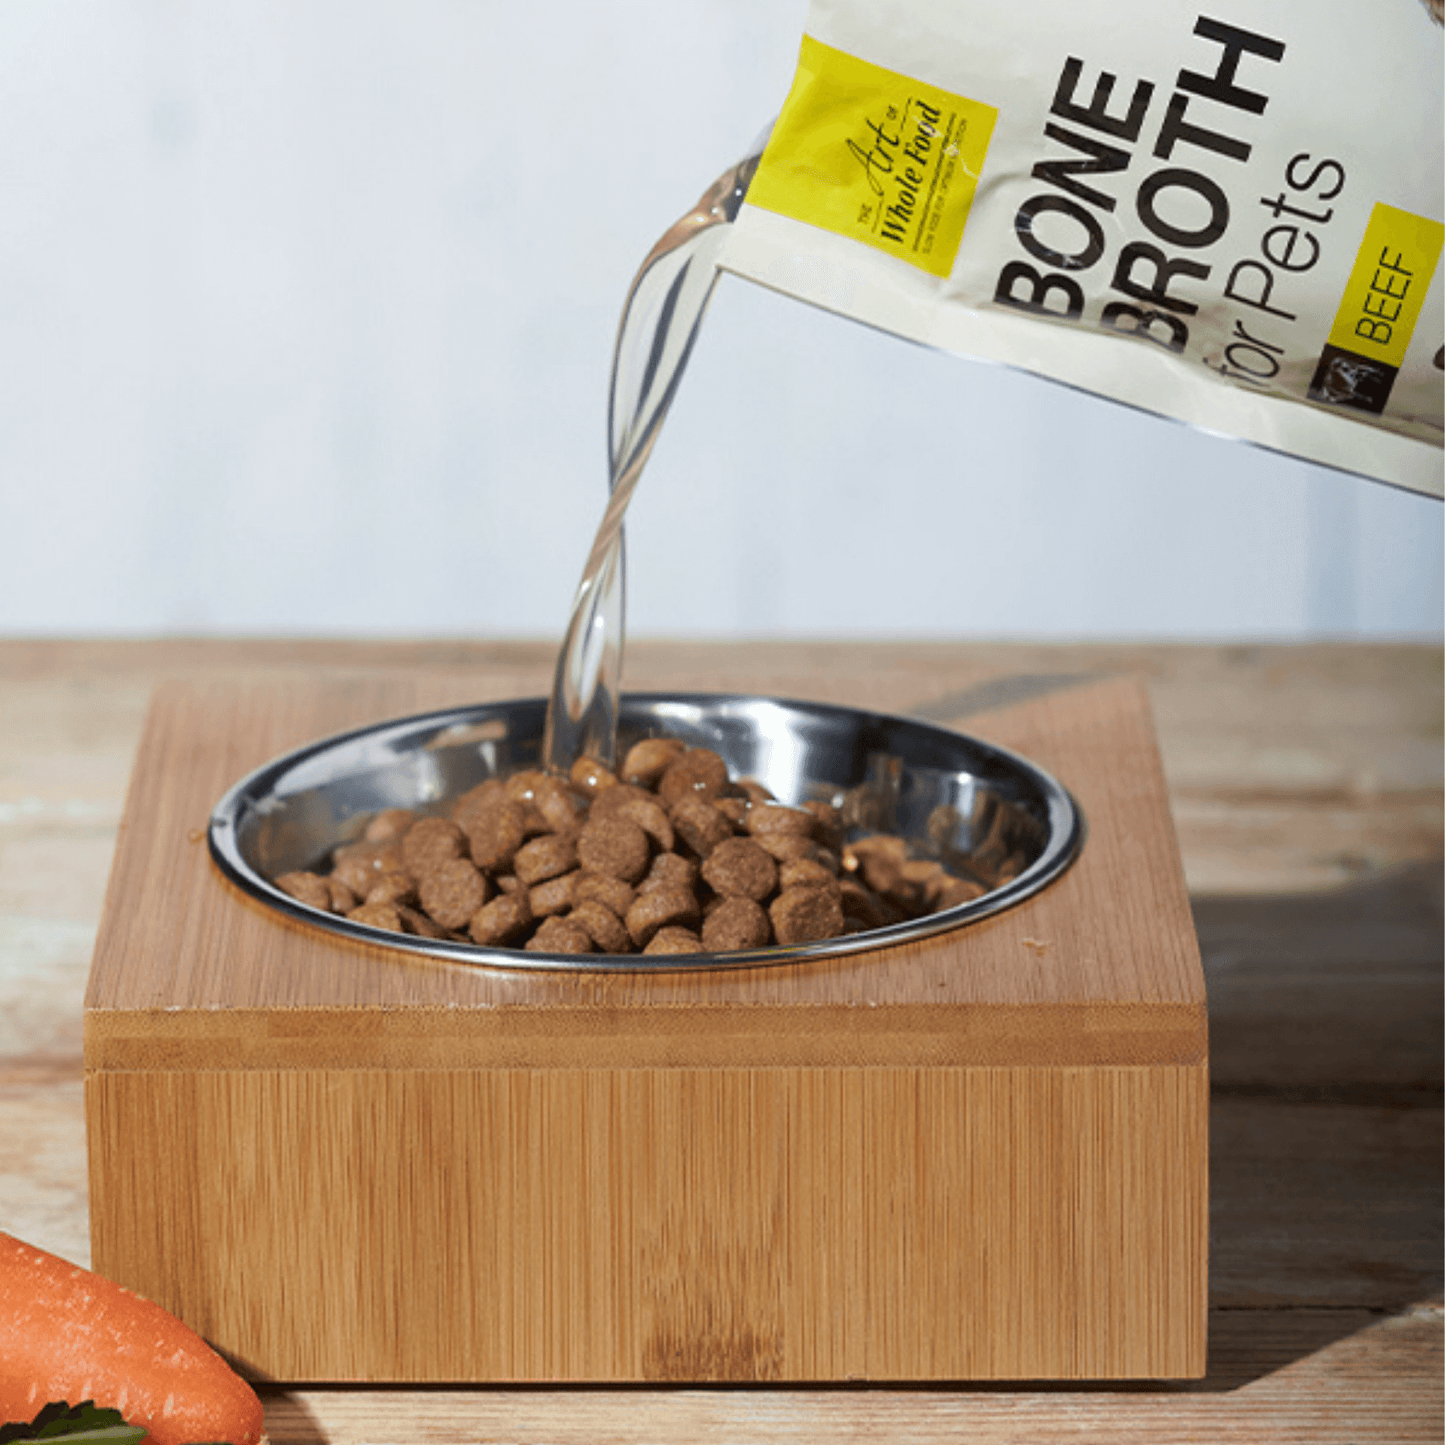 Beef broth healthy dog supplement, let's pawty